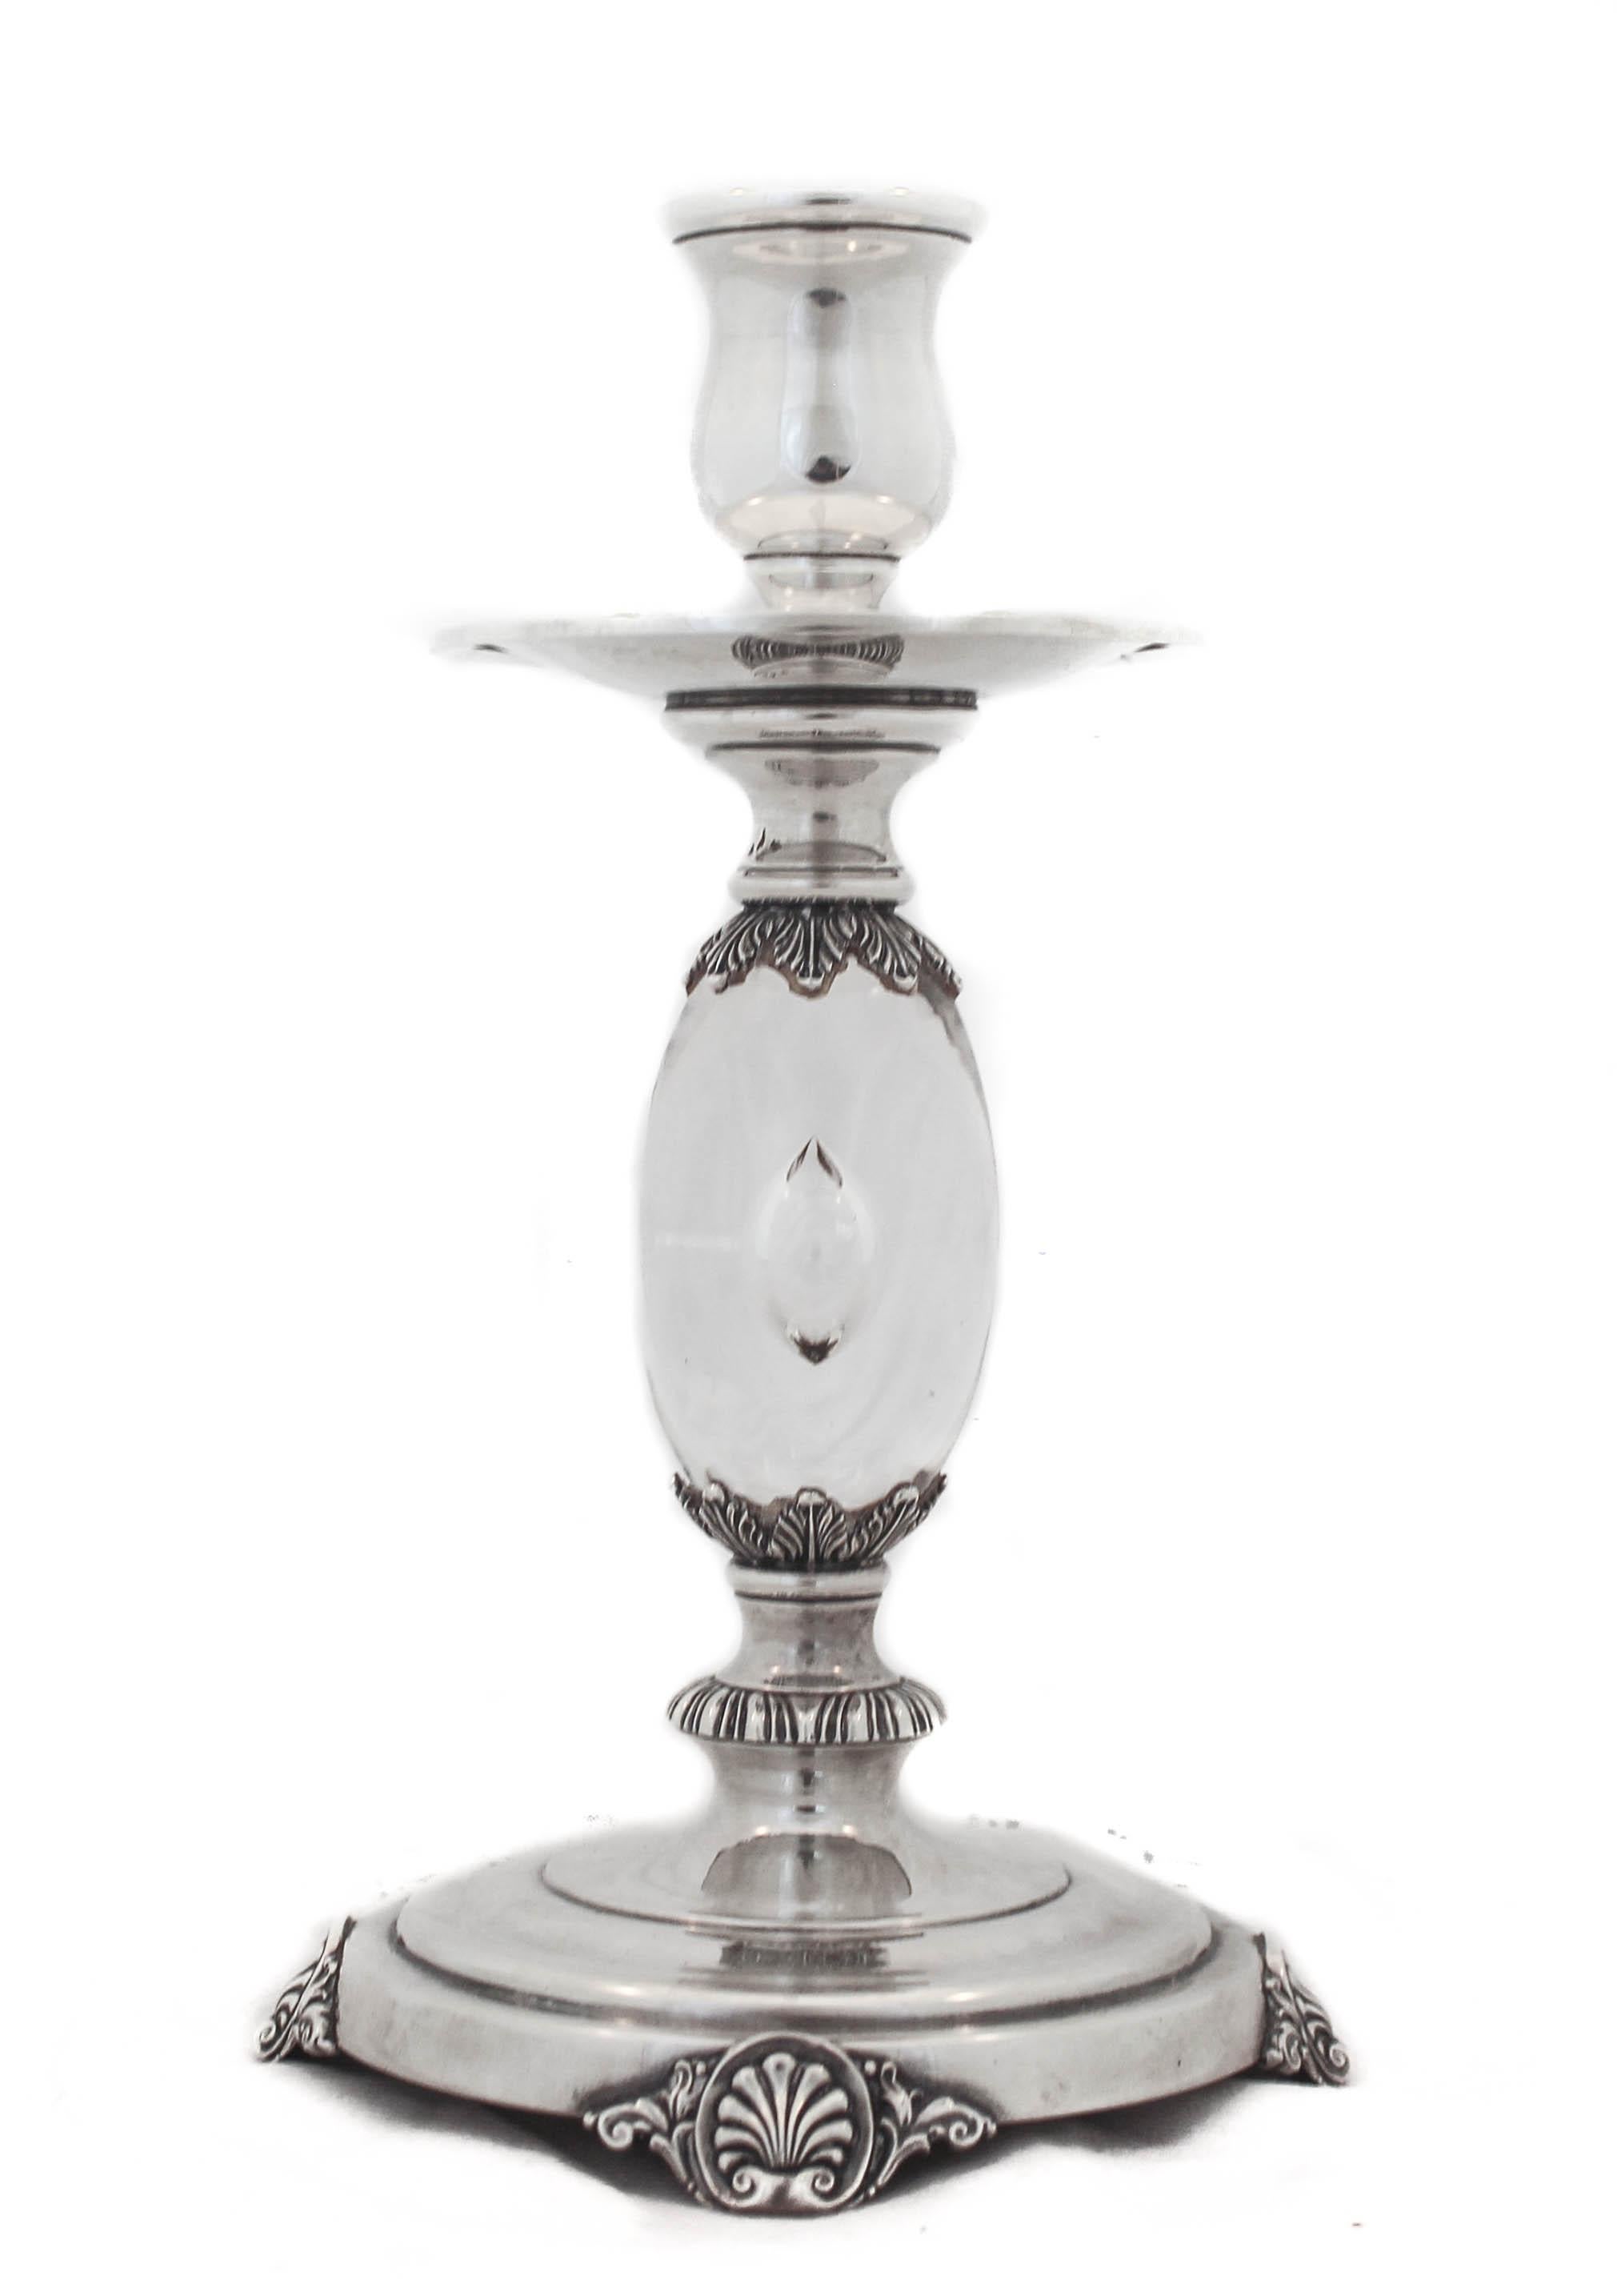 We are thrilled to offer you this pair of sterling silver candlesticks by the Quaker Silver Company of Massachusetts. These are exceptionally rare and simply stunning. The top and bottom are sterling (not weighted) and the pedestal is crystal with a